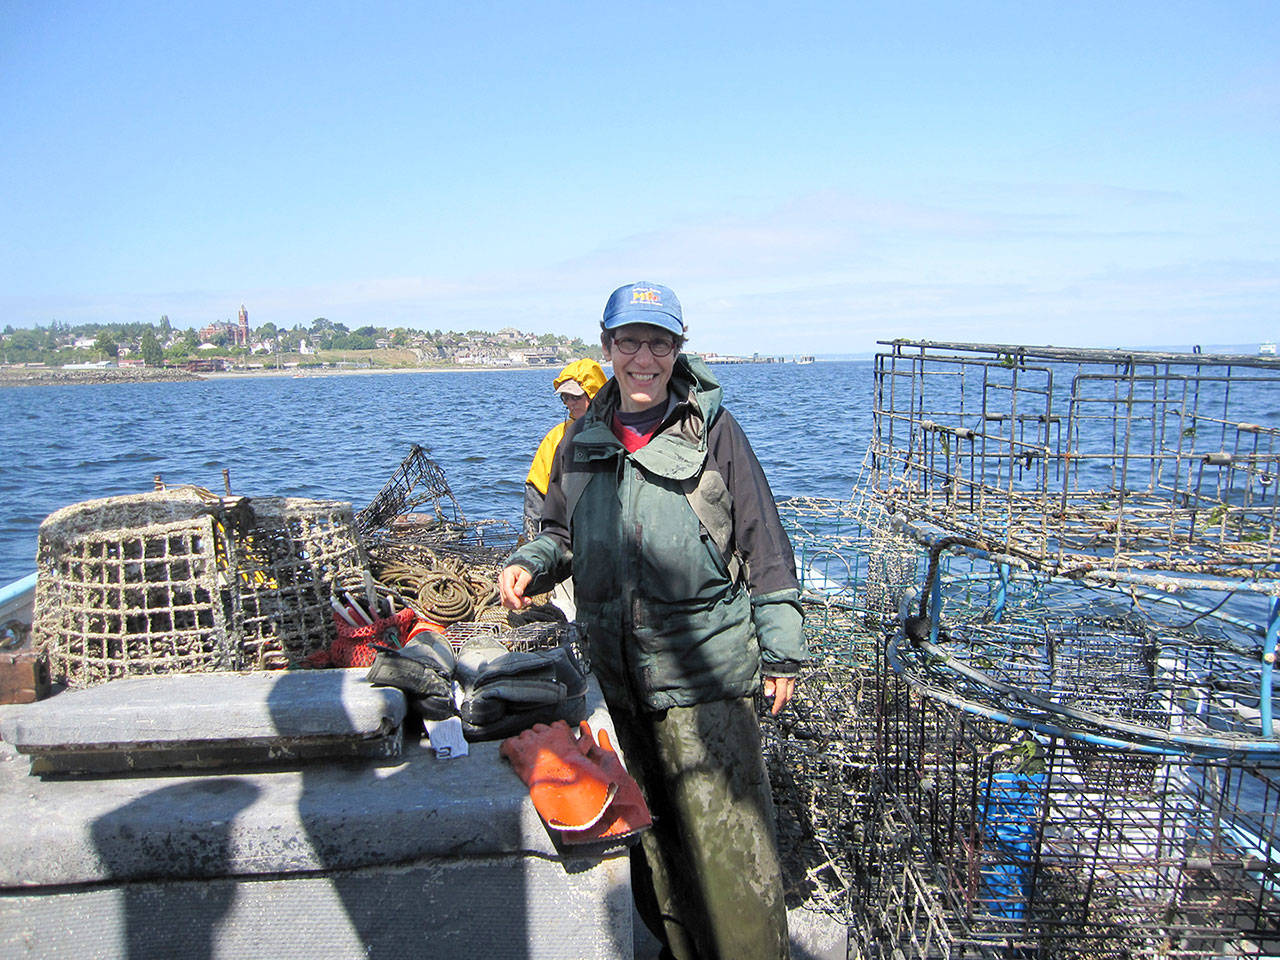 Cheryl Lowe of the Jefferson Marine Resources Committee after a successful trip cleaning up derelict crab pots. (Paul Ruddell)